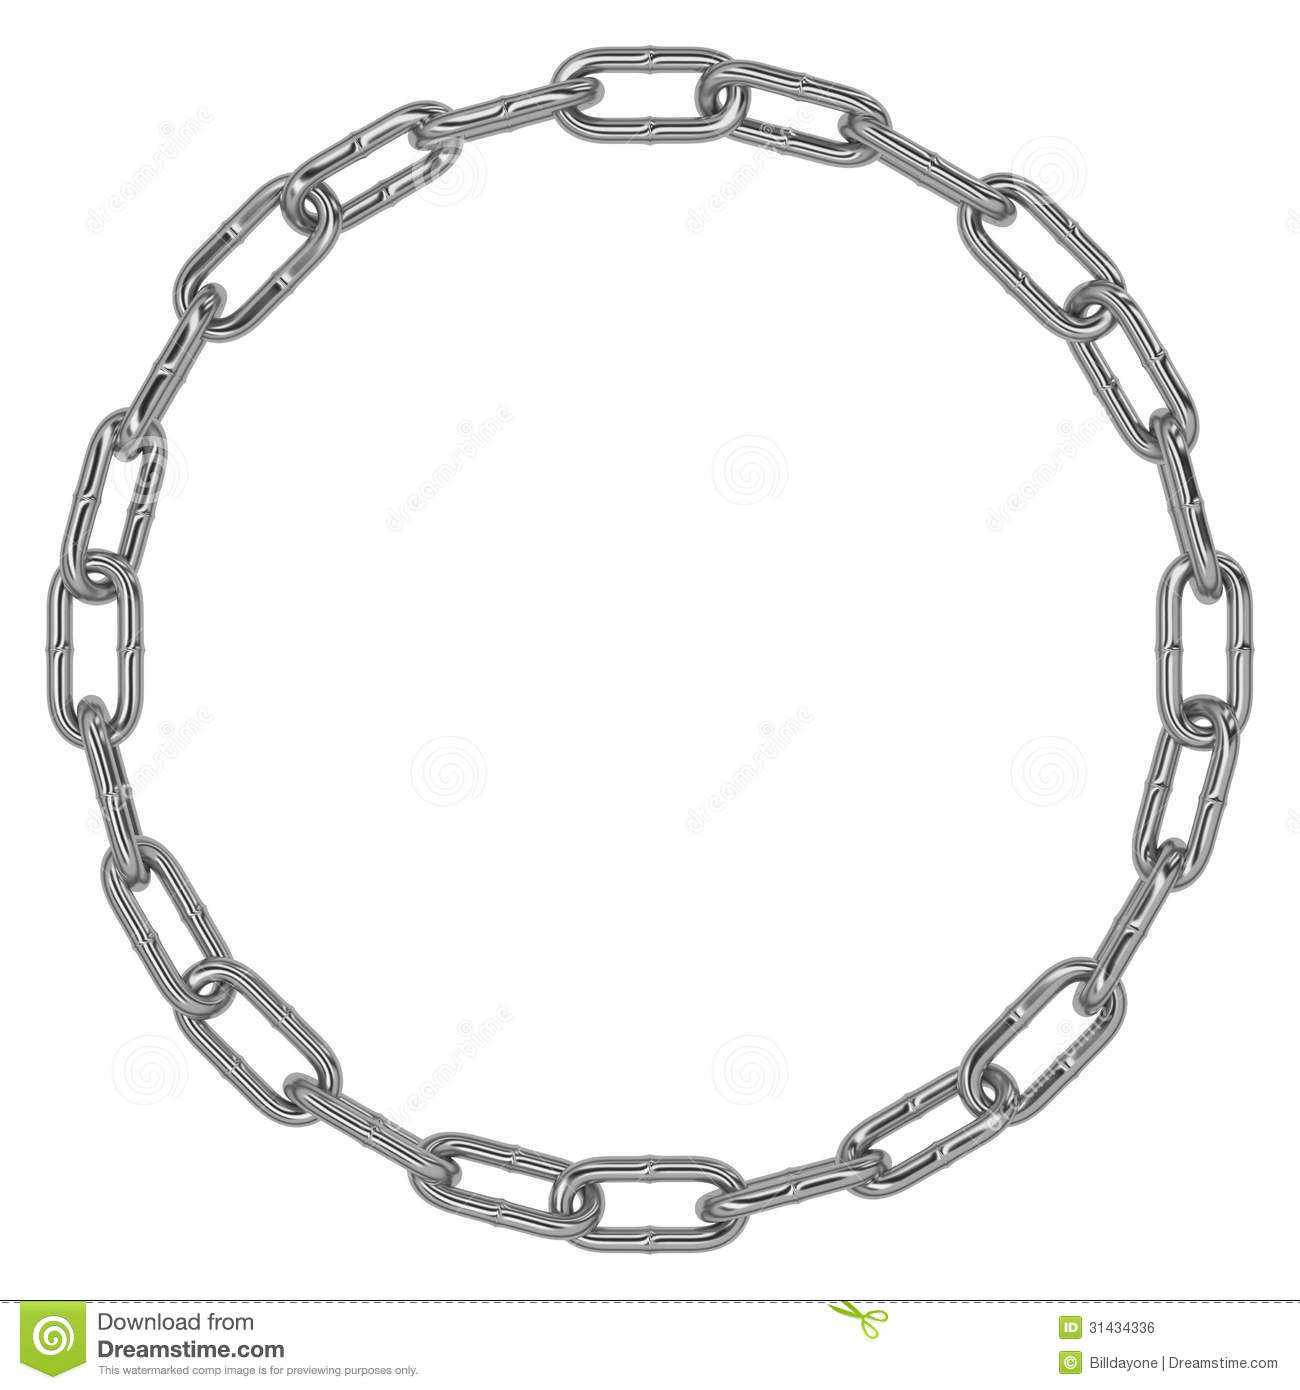 Chain Links Making A Circular Chrome Figure On White Background